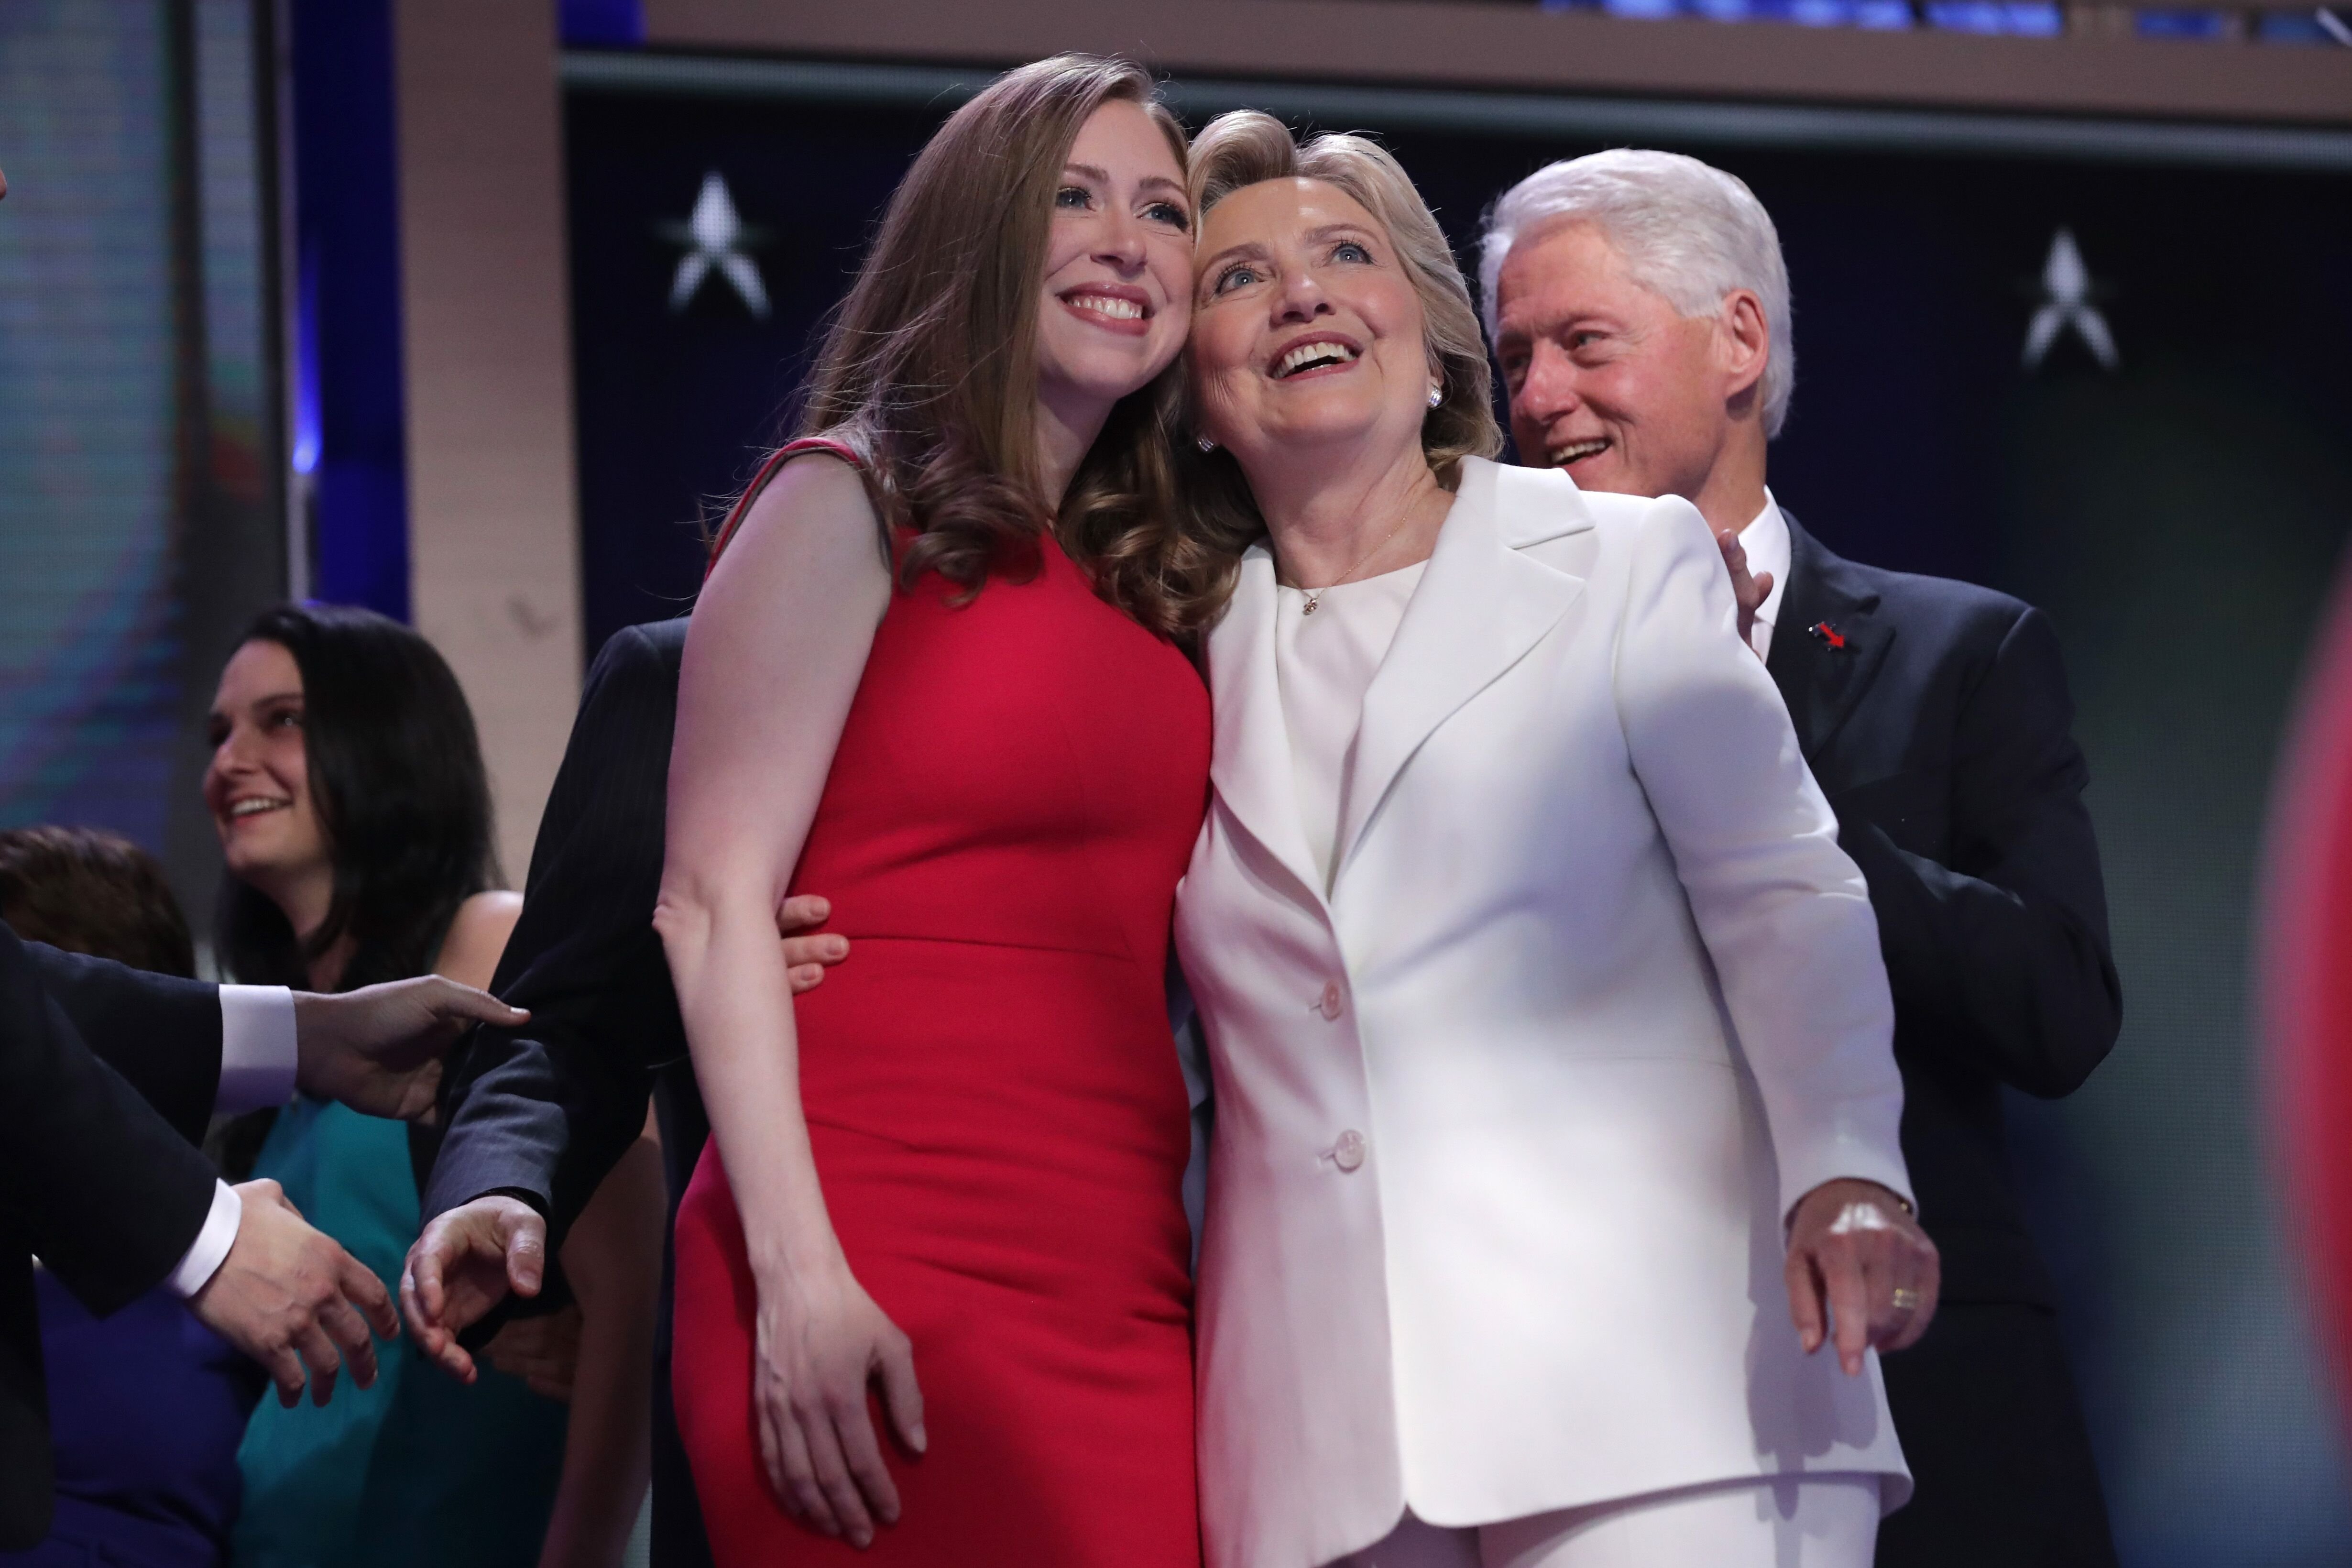 Hillary Clinton and Chelsea Clinton at the Democratic National Convention. | Photo: Getty Images